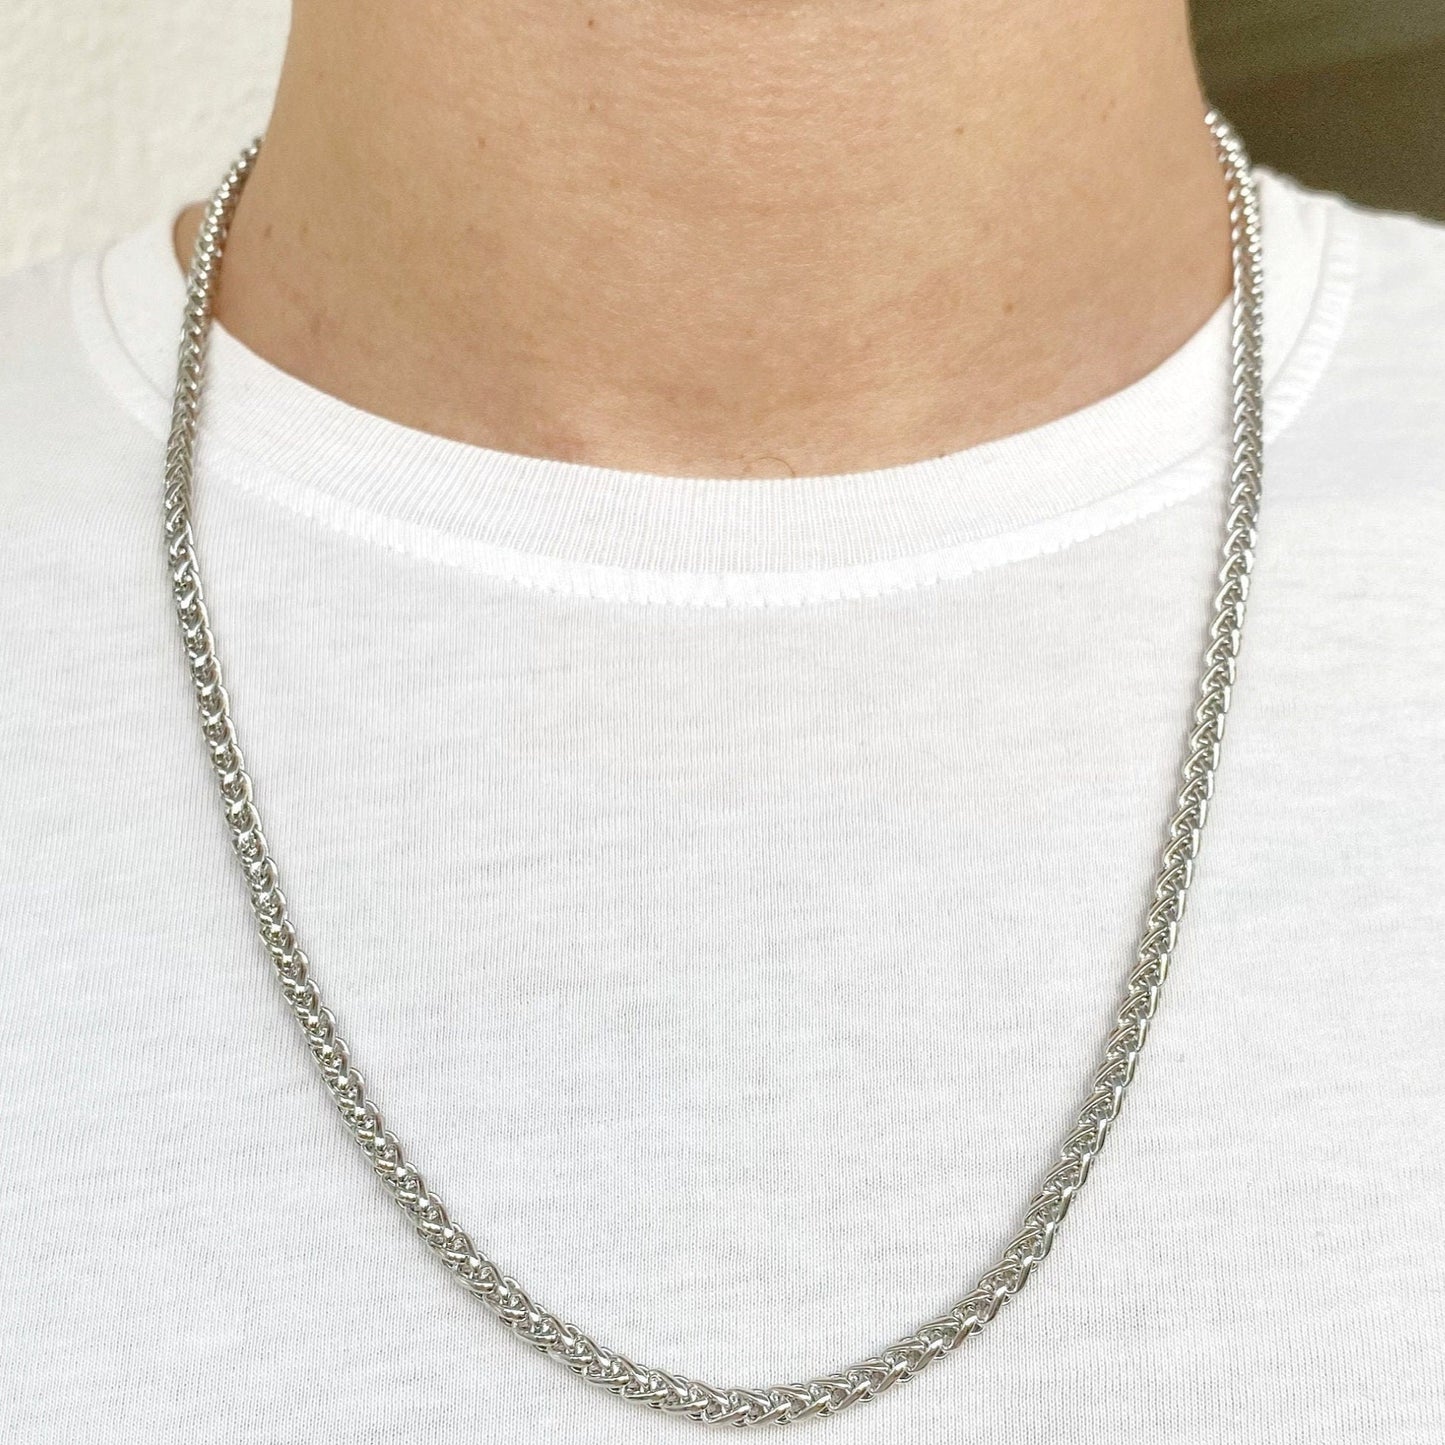 Unisex Silver Curb Rope Chain Necklace • Dangling Twisted Chain